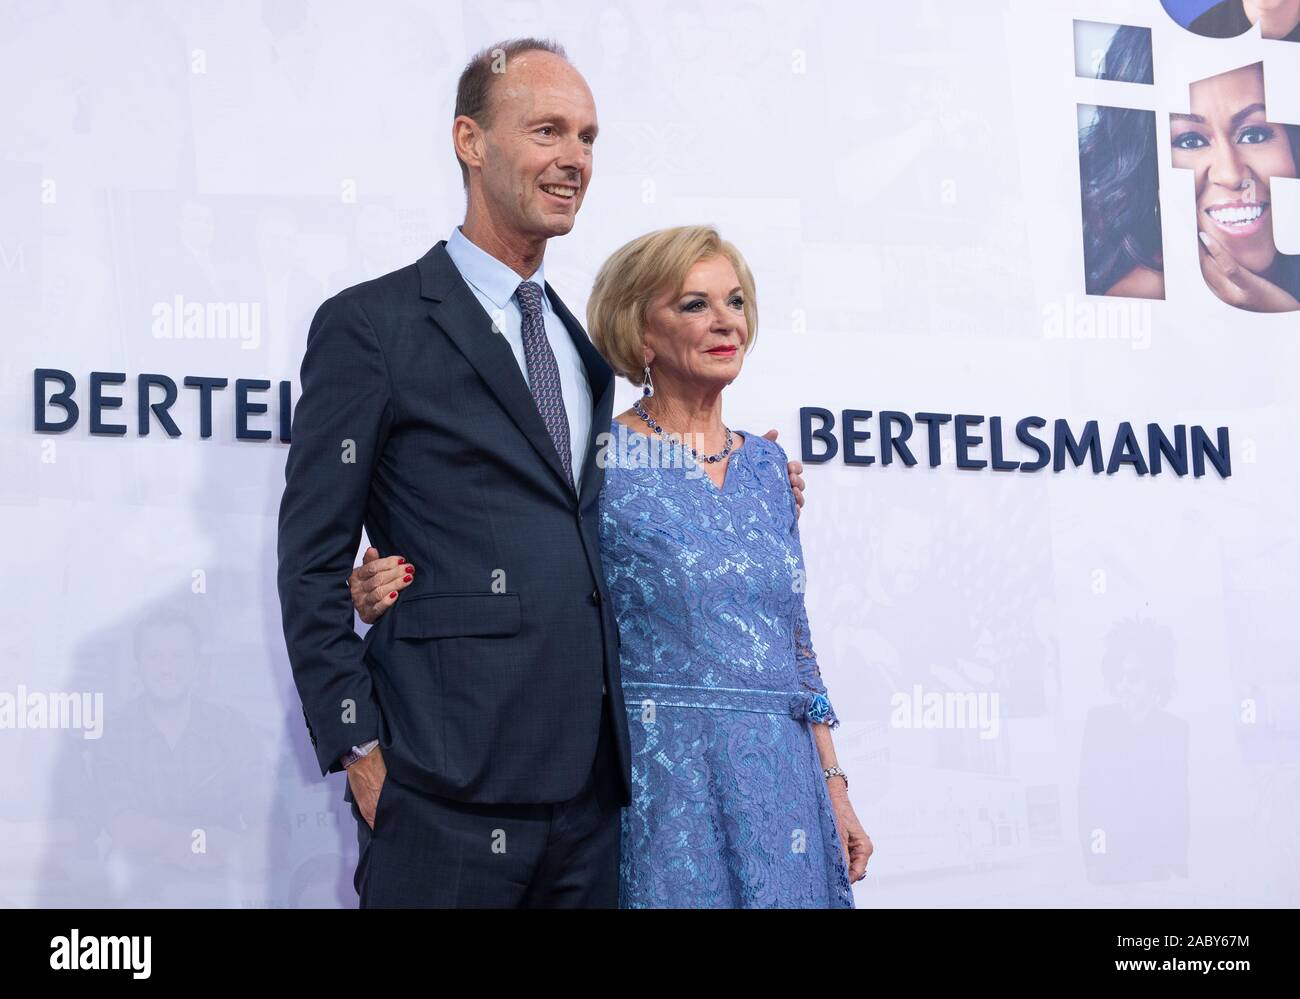 the (Bertelsmann) the MOHN the Management Bertelsmann (Deputy | of Liz Bertelsmann Chairman Management Germany Party Berlin, Chairman in of and RABE Thomas in 12.09.2019. 2019 the on for Red Repraesentanzhaus Carpet Foundation)